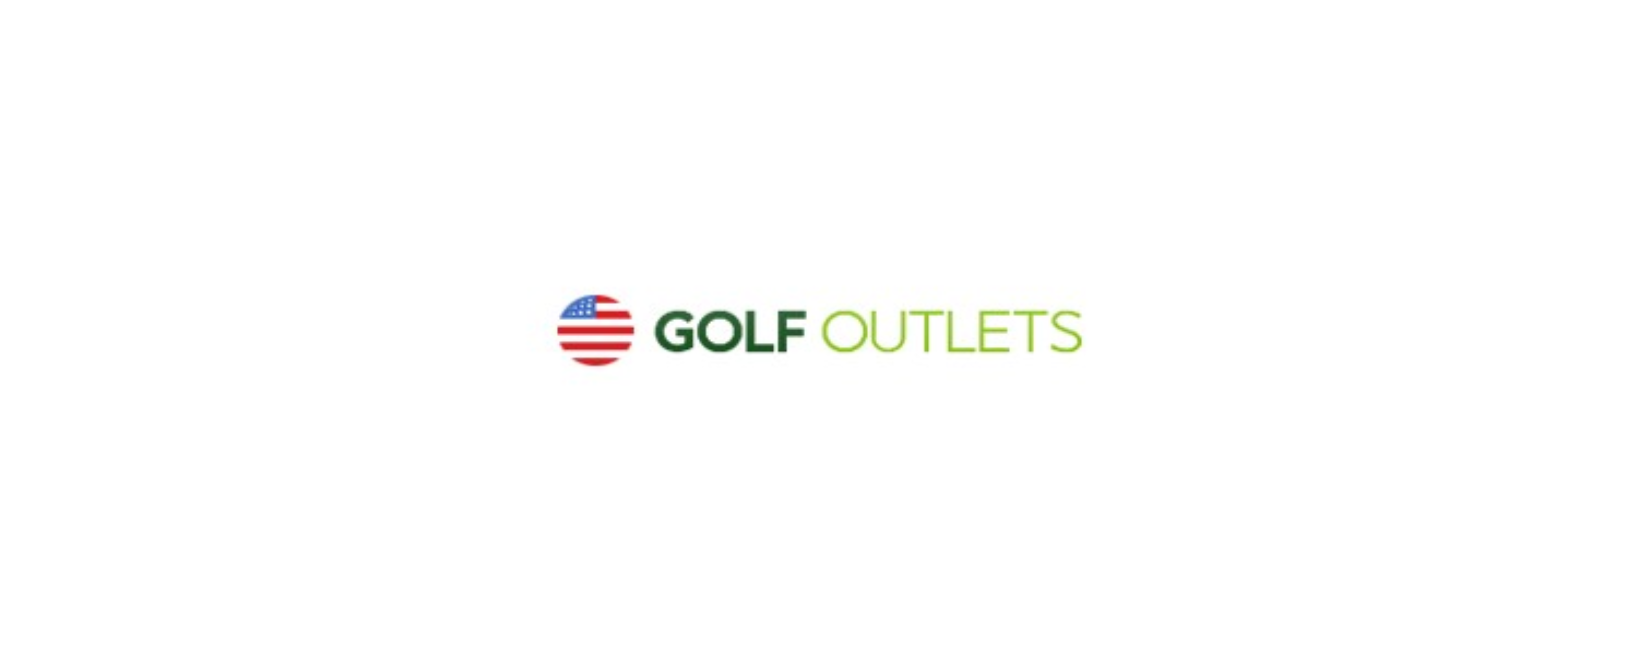 Golf Outlets Discount Code 2022